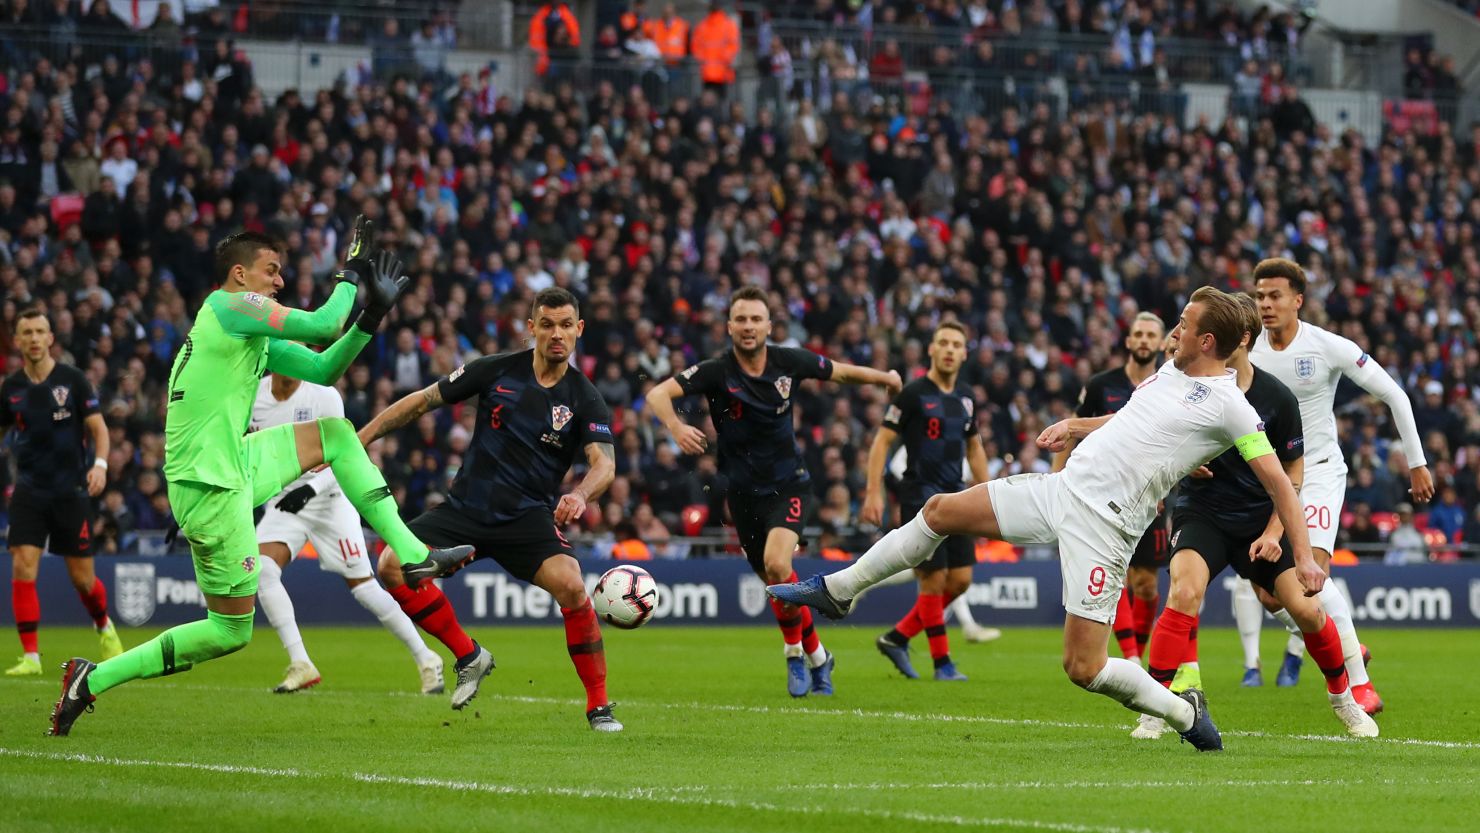 England's Harry Kane provides an assist for Jesse Lingard for the team's first goal against Croatia.